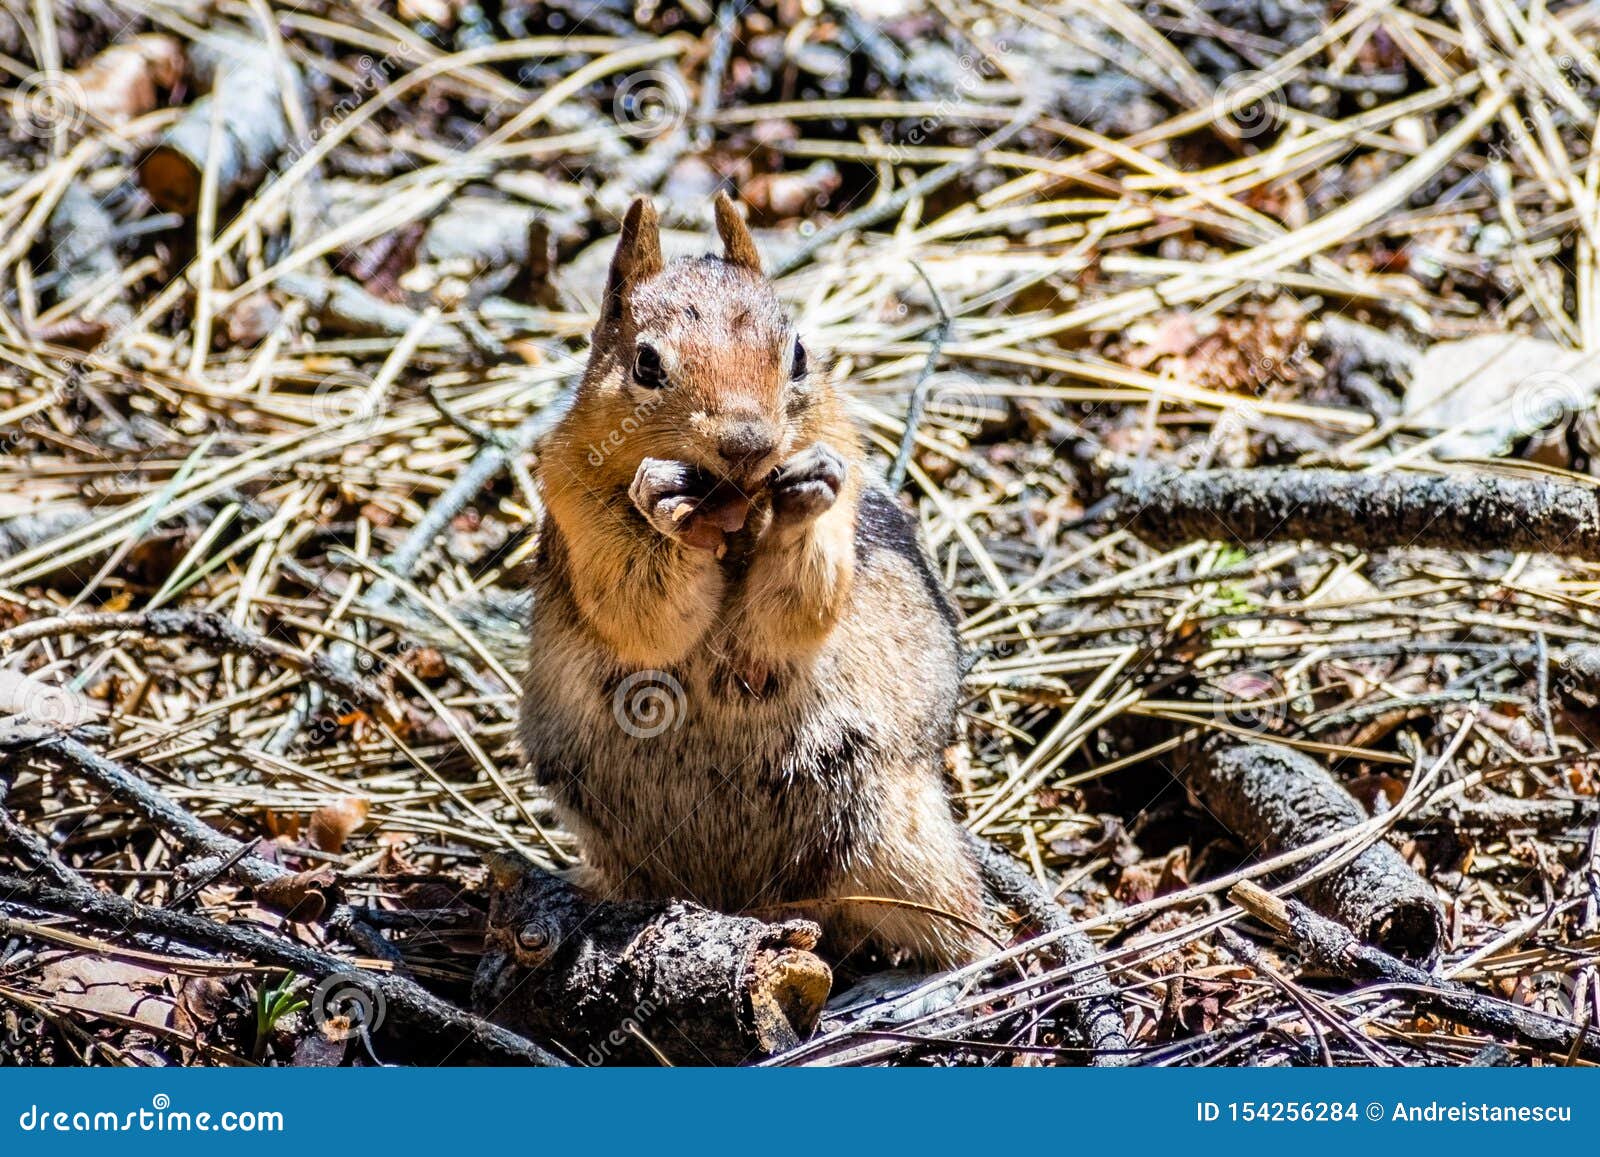 Frontal View of Cute Chipmunk Eating Seeds from the Ground, Yosemite